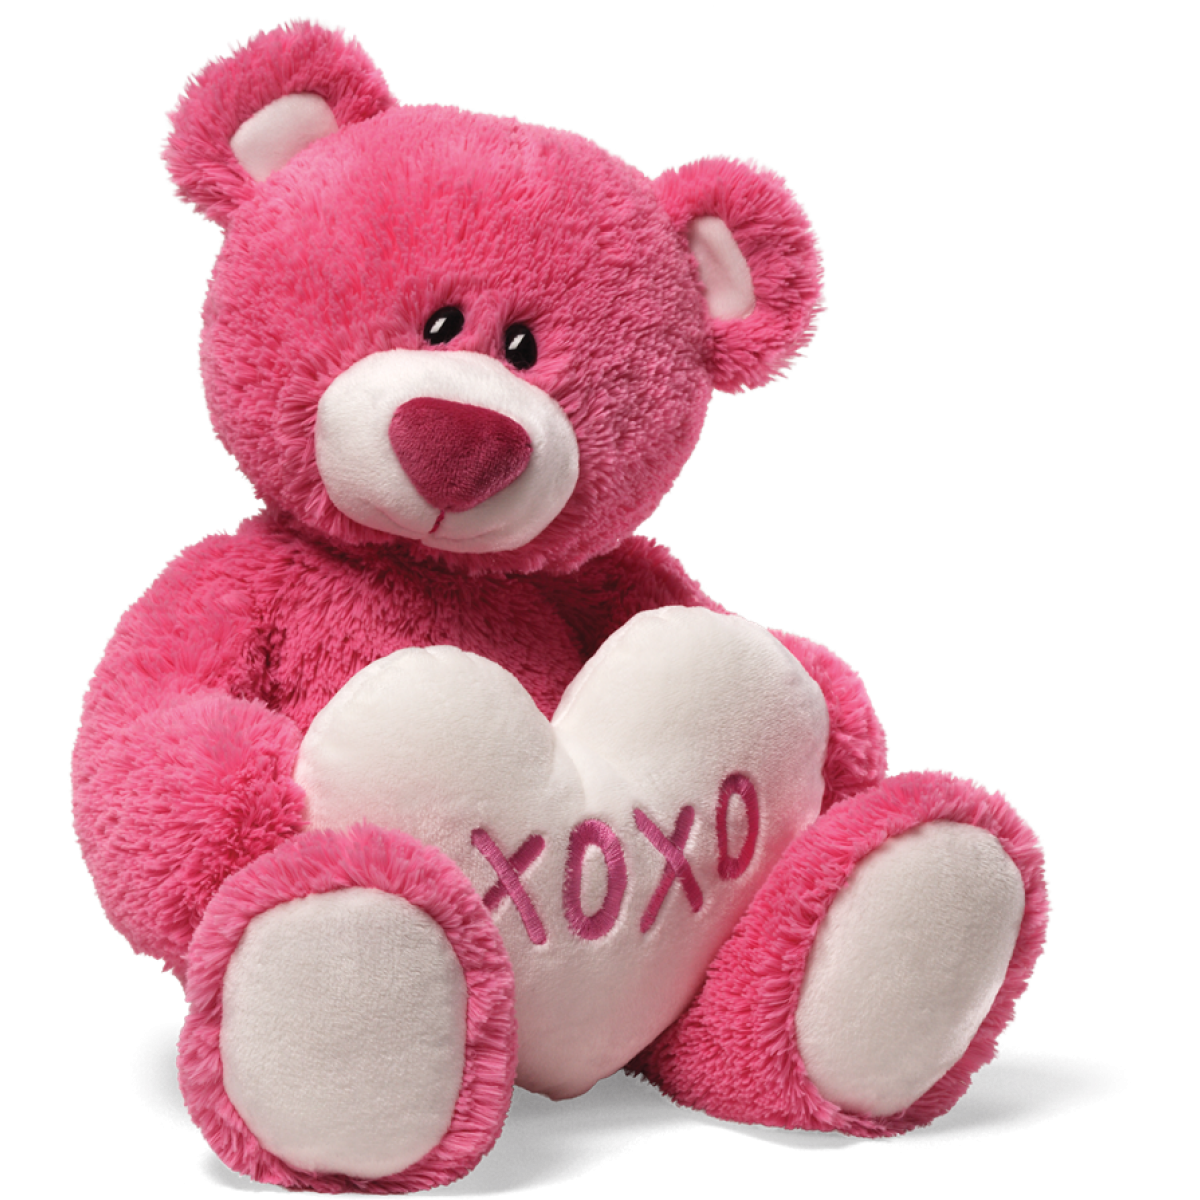 Teddy Bear Png Picture PNG Im